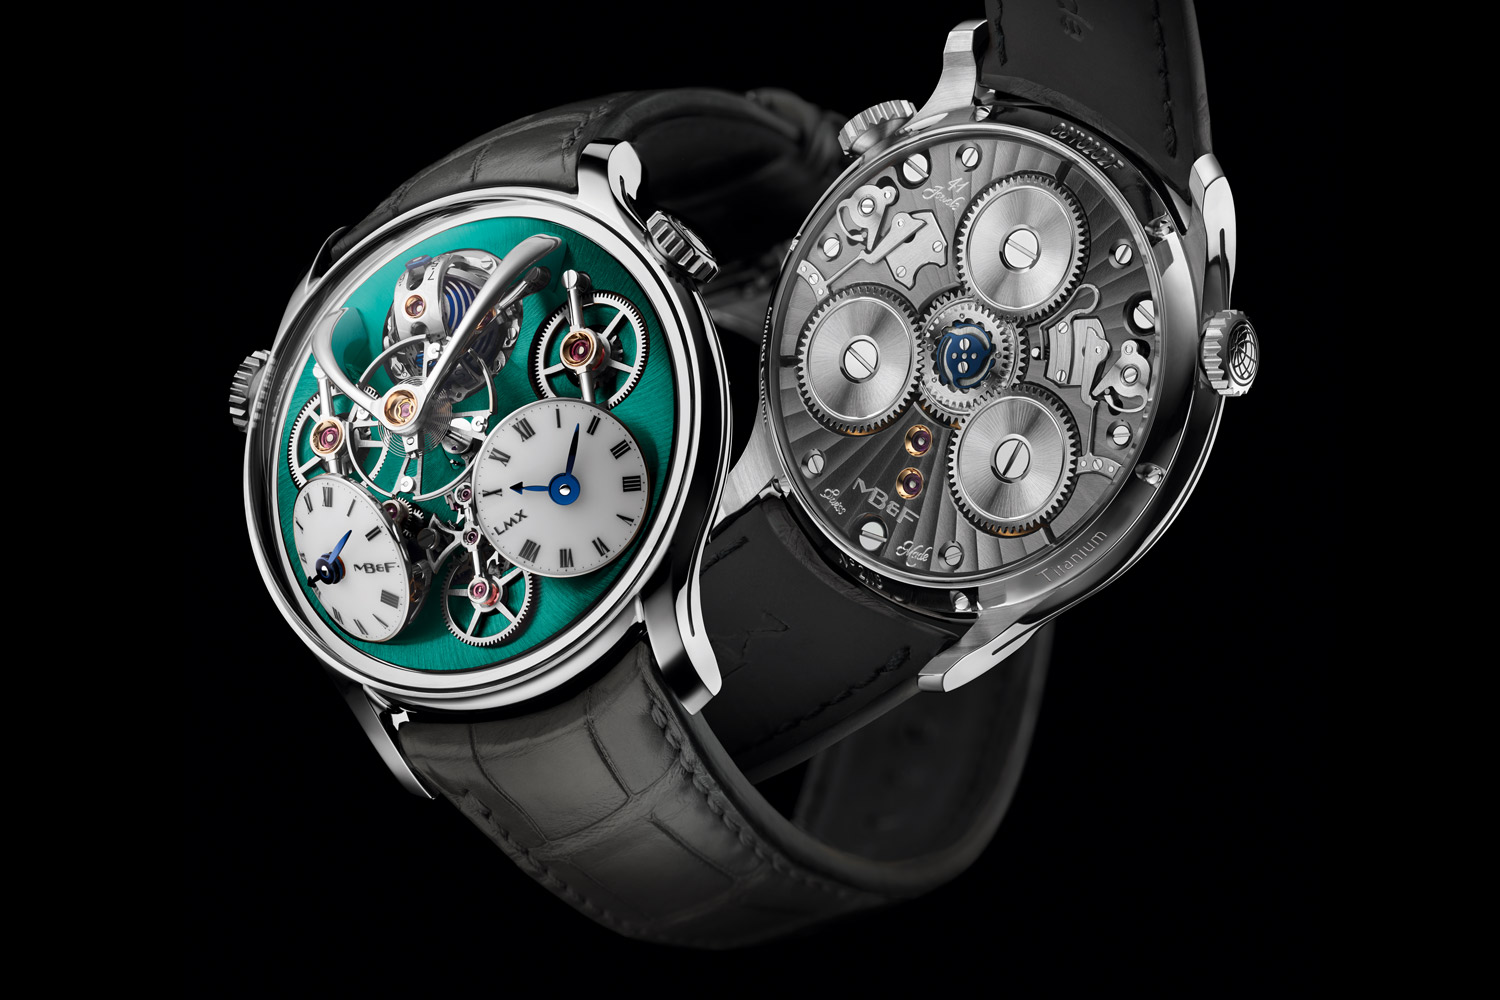 The MB&F LMX in polished grade 5 titanium with green CVD treatment on plates and bridges